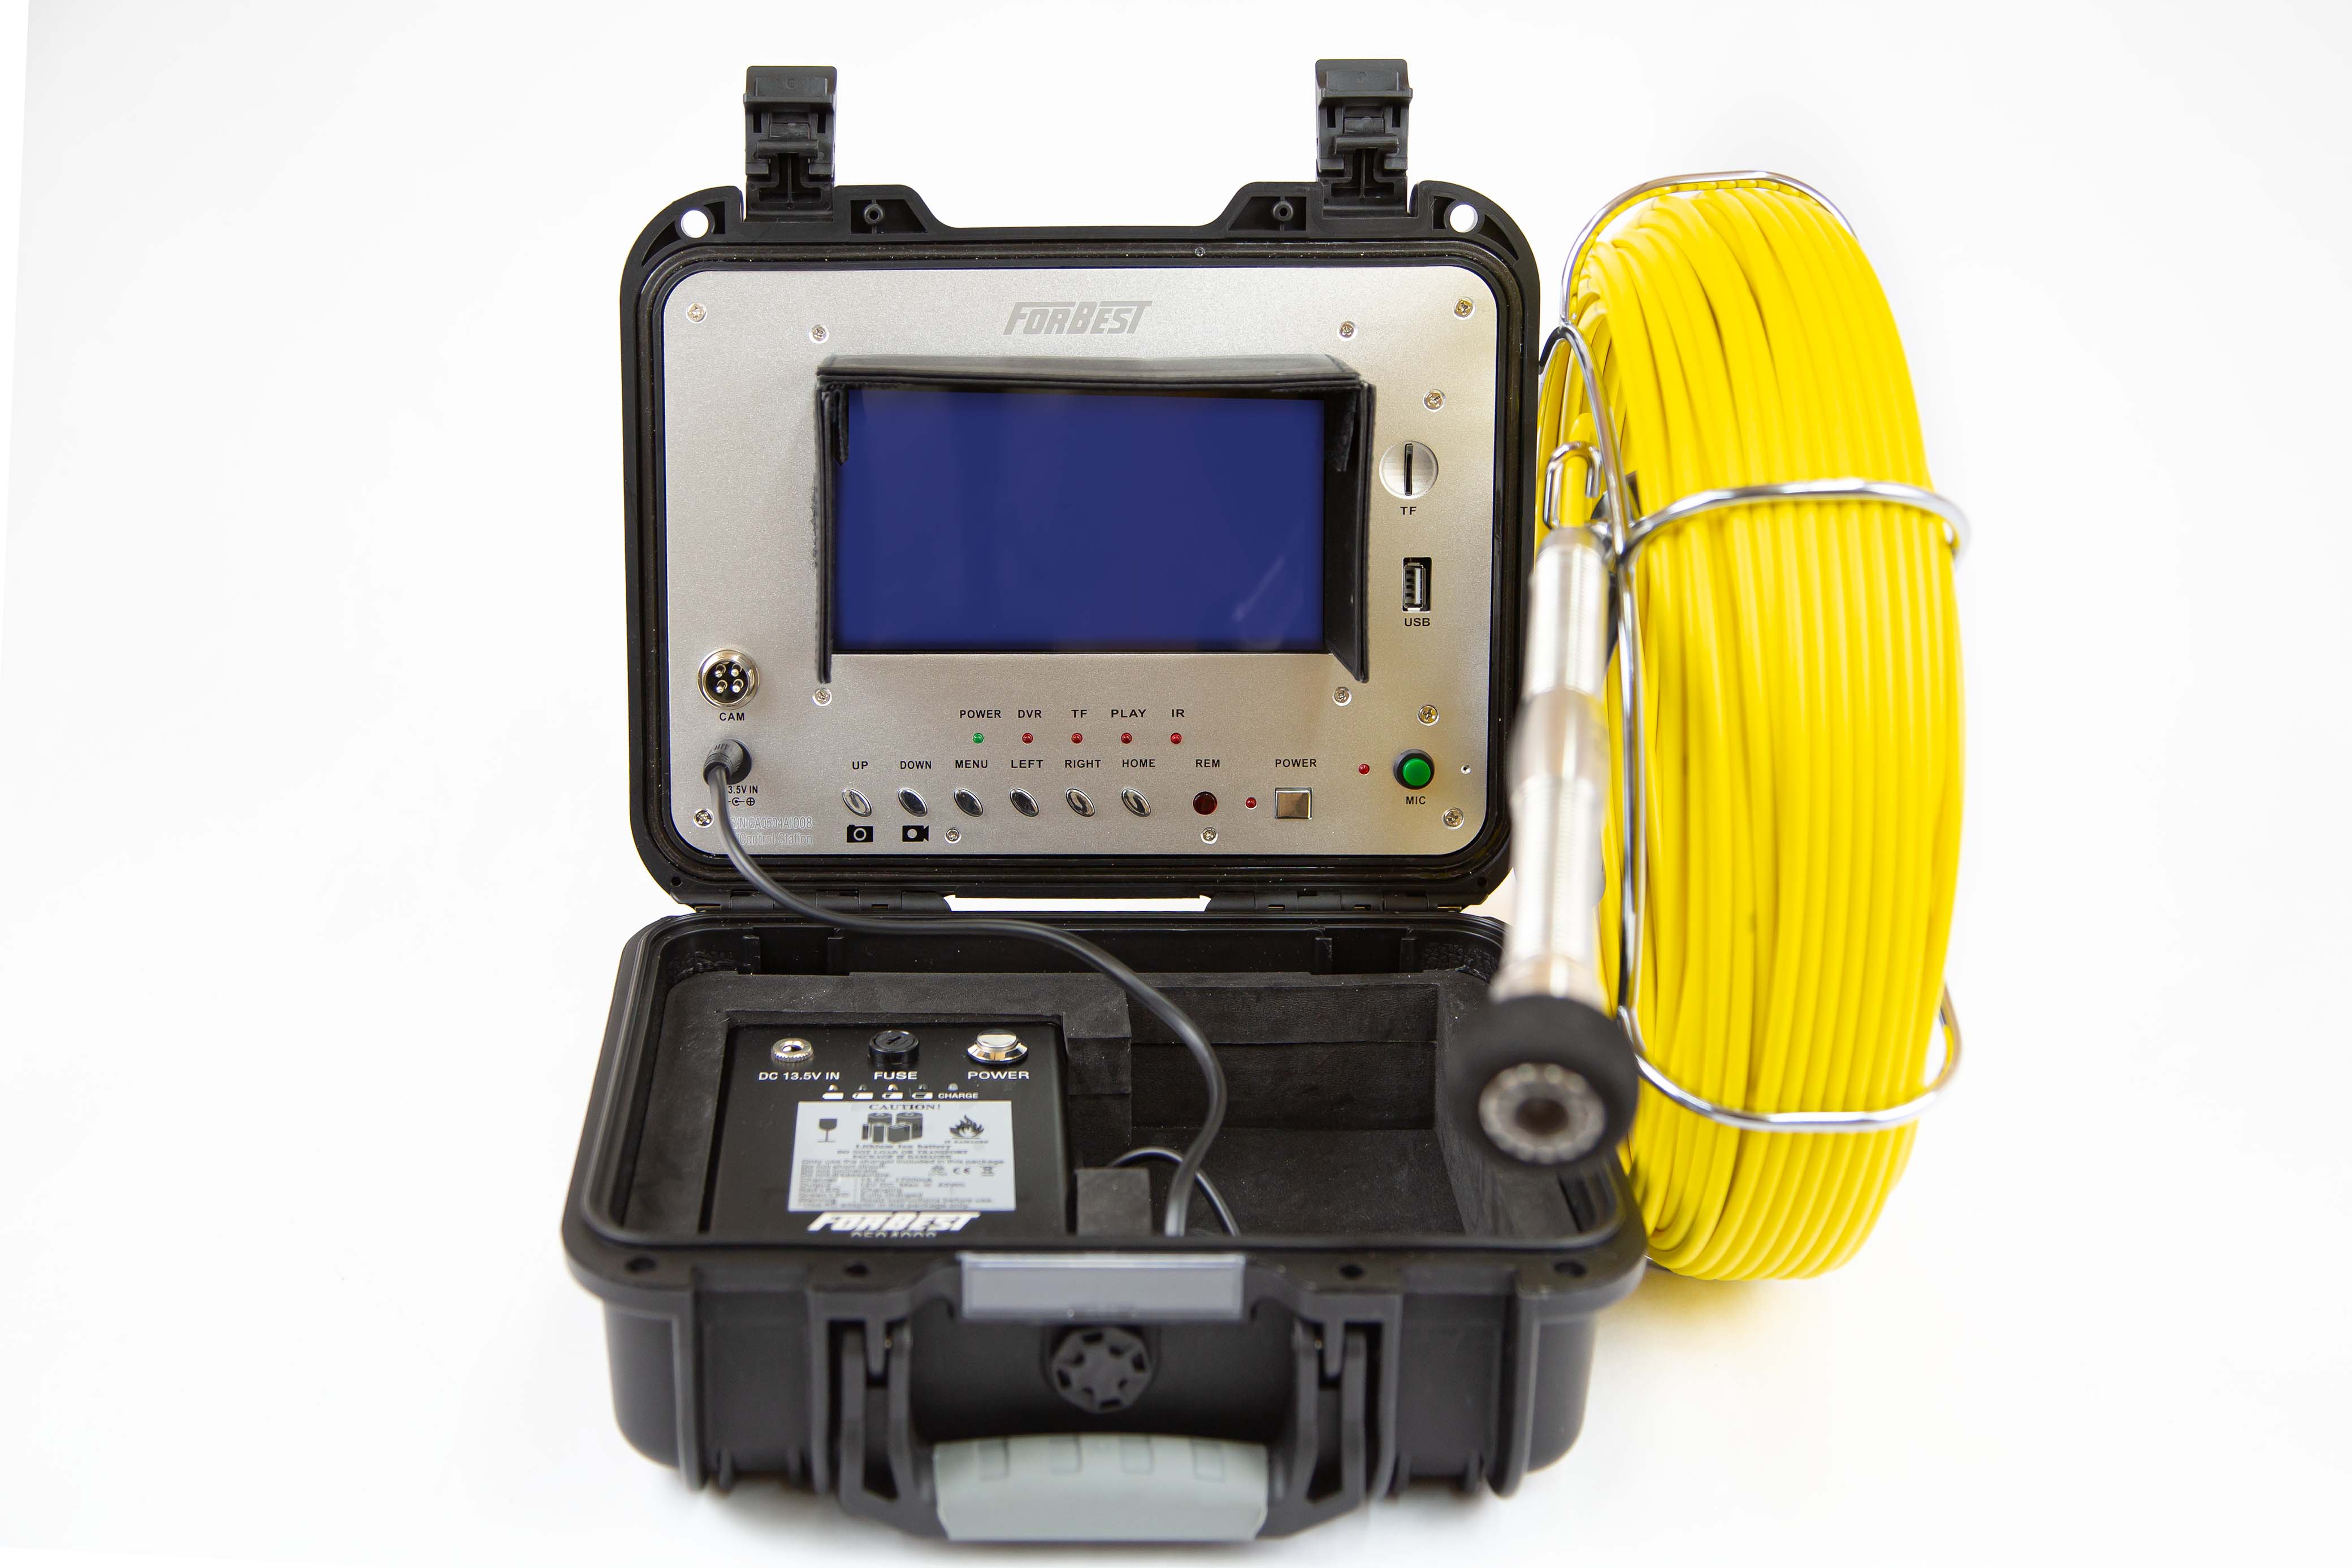 Forbest 3188SD+ Portable Sewer Camera with 130-Ft Cable, 512HZ Transmitter and 7" LCD Screen